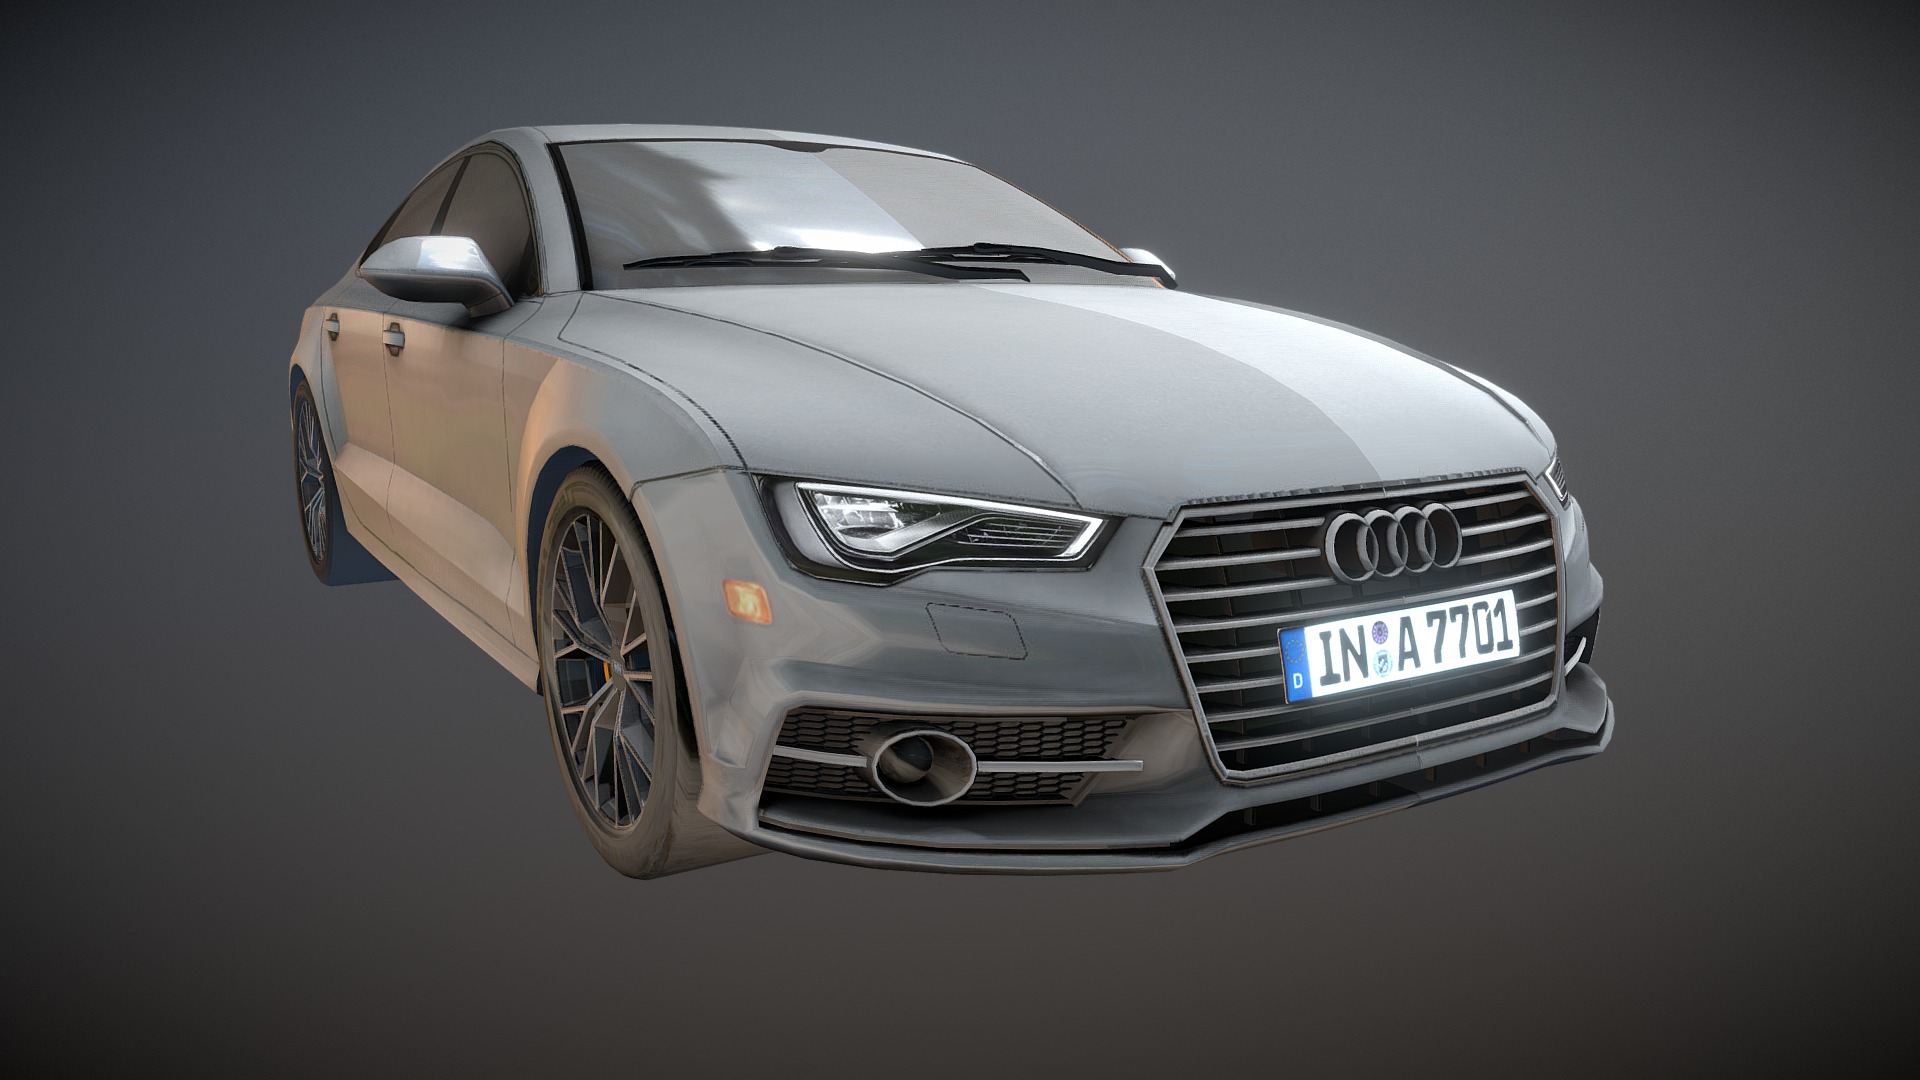 3D model Audi 2016 Car Model Mid Poly - This is a 3D model of the Audi 2016 Car Model Mid Poly. The 3D model is about a silver sports car.